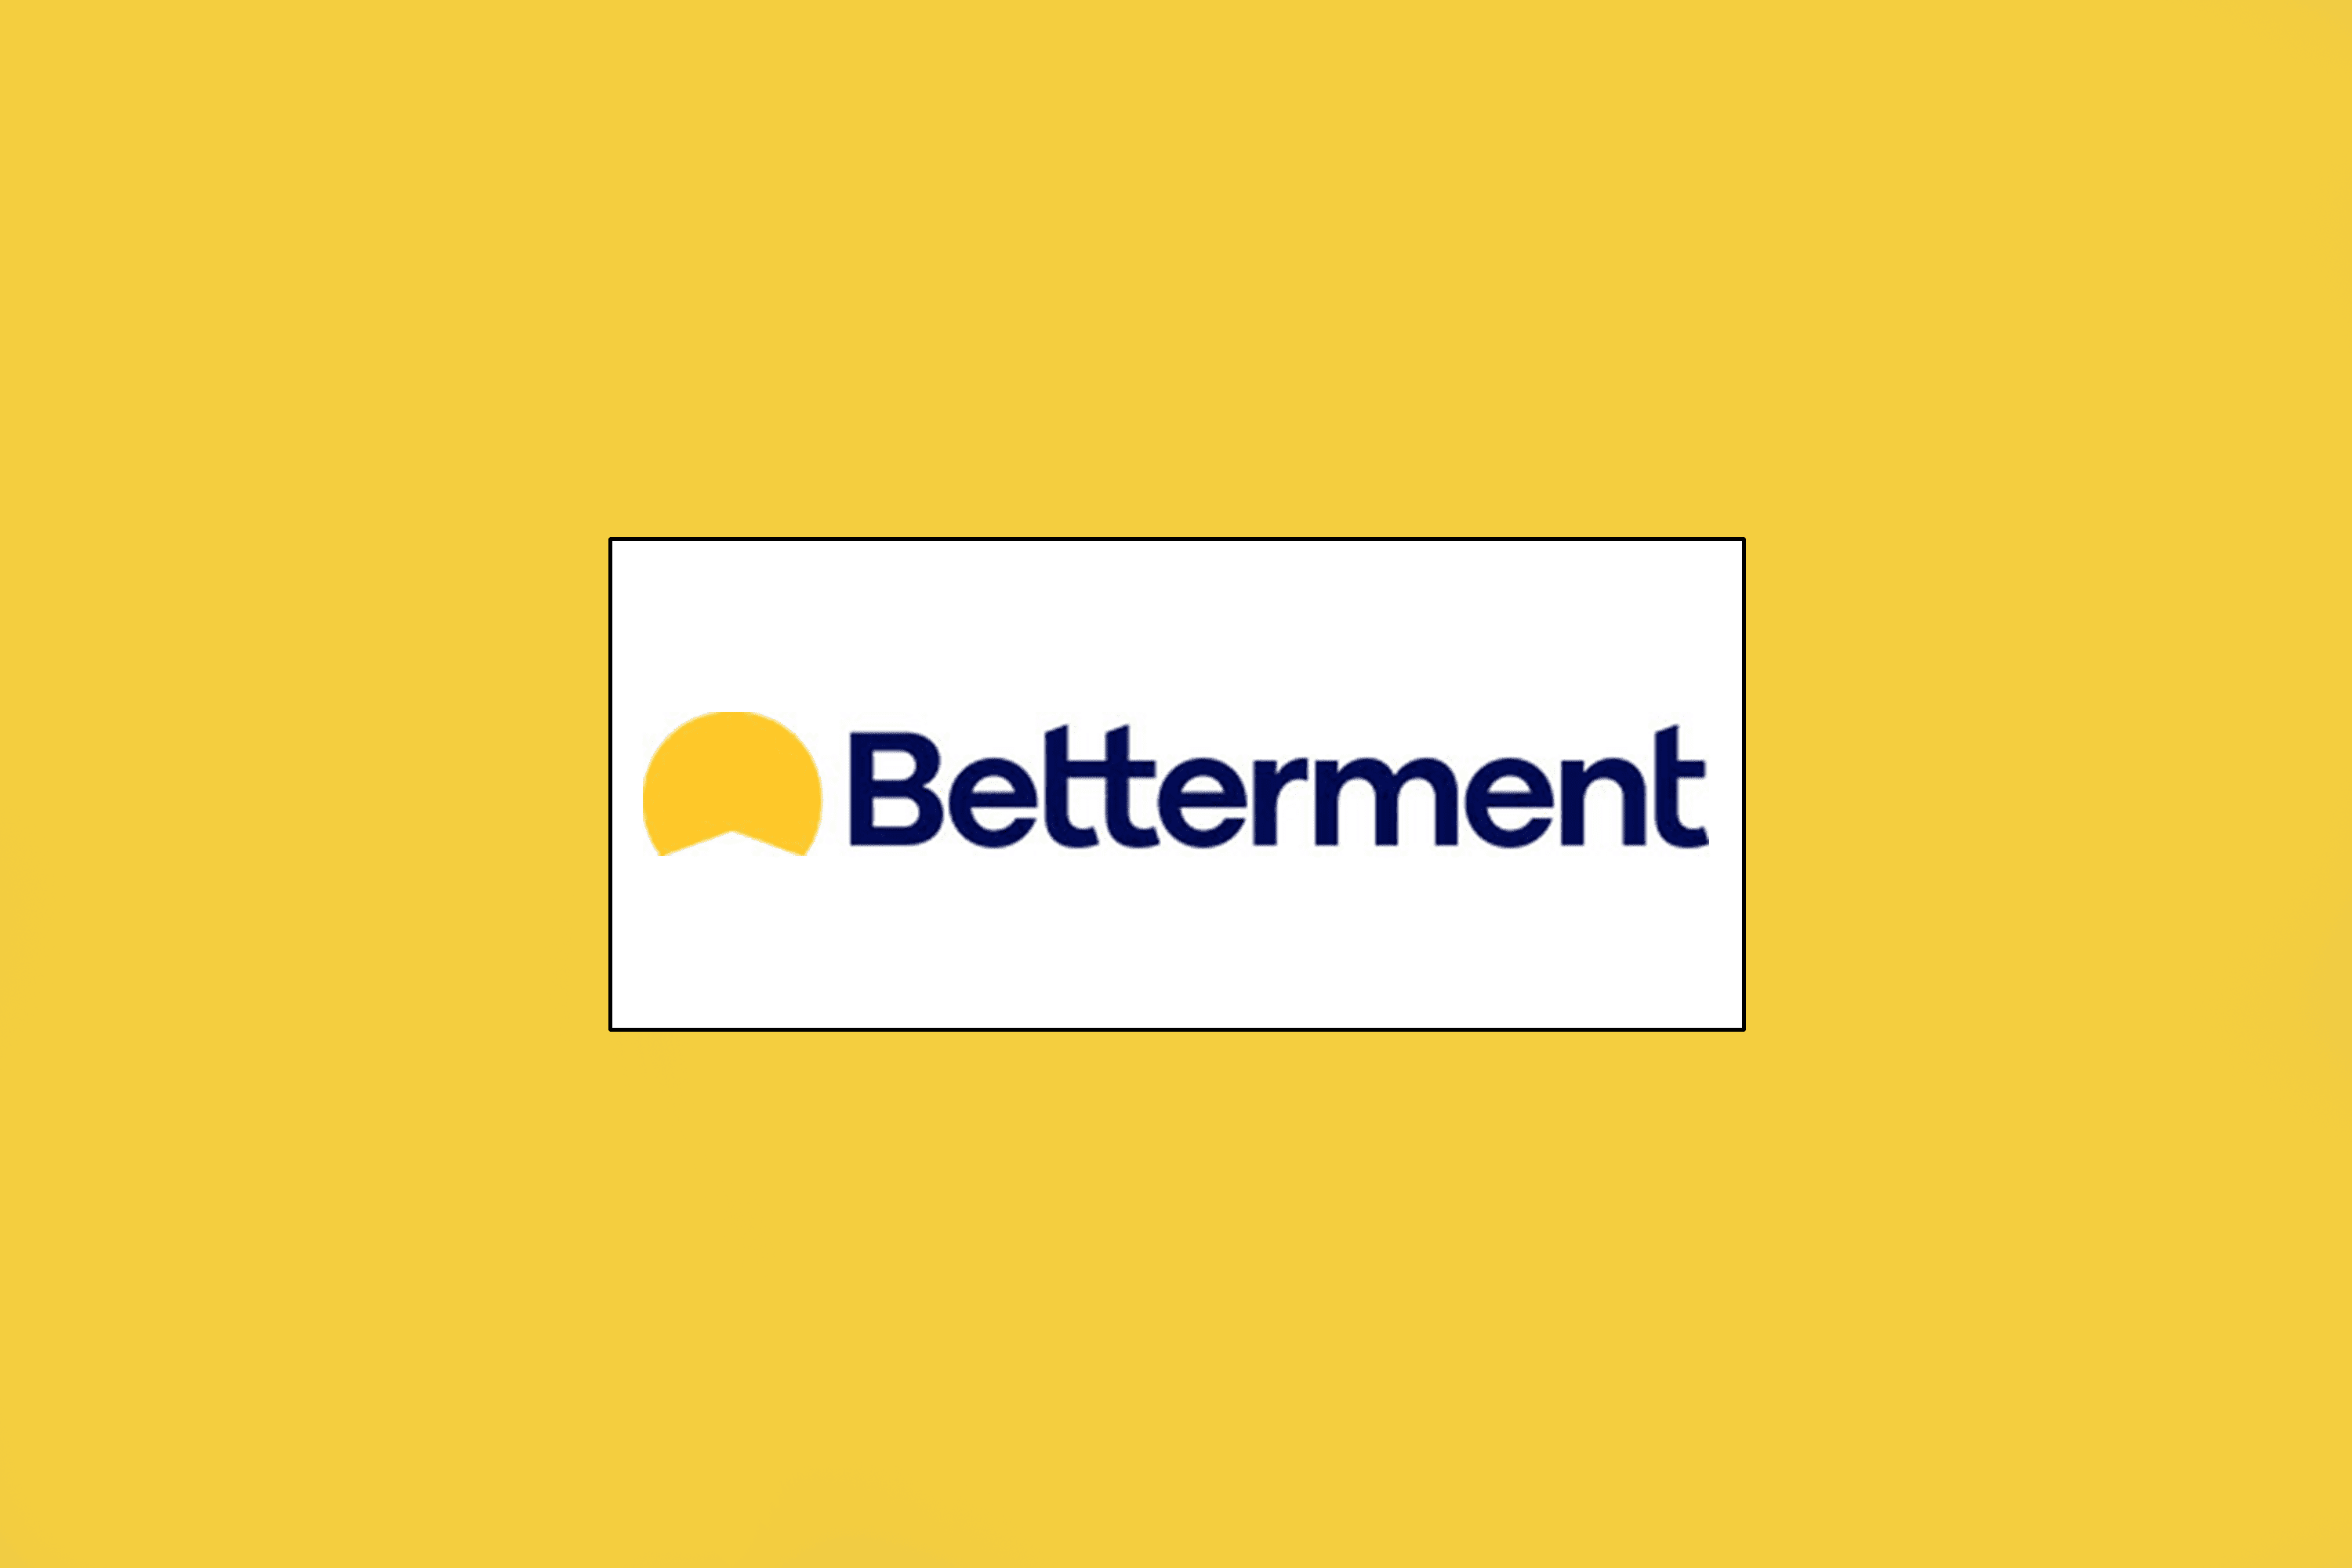 Image shows a yellow background with the Betterment logo in the center.